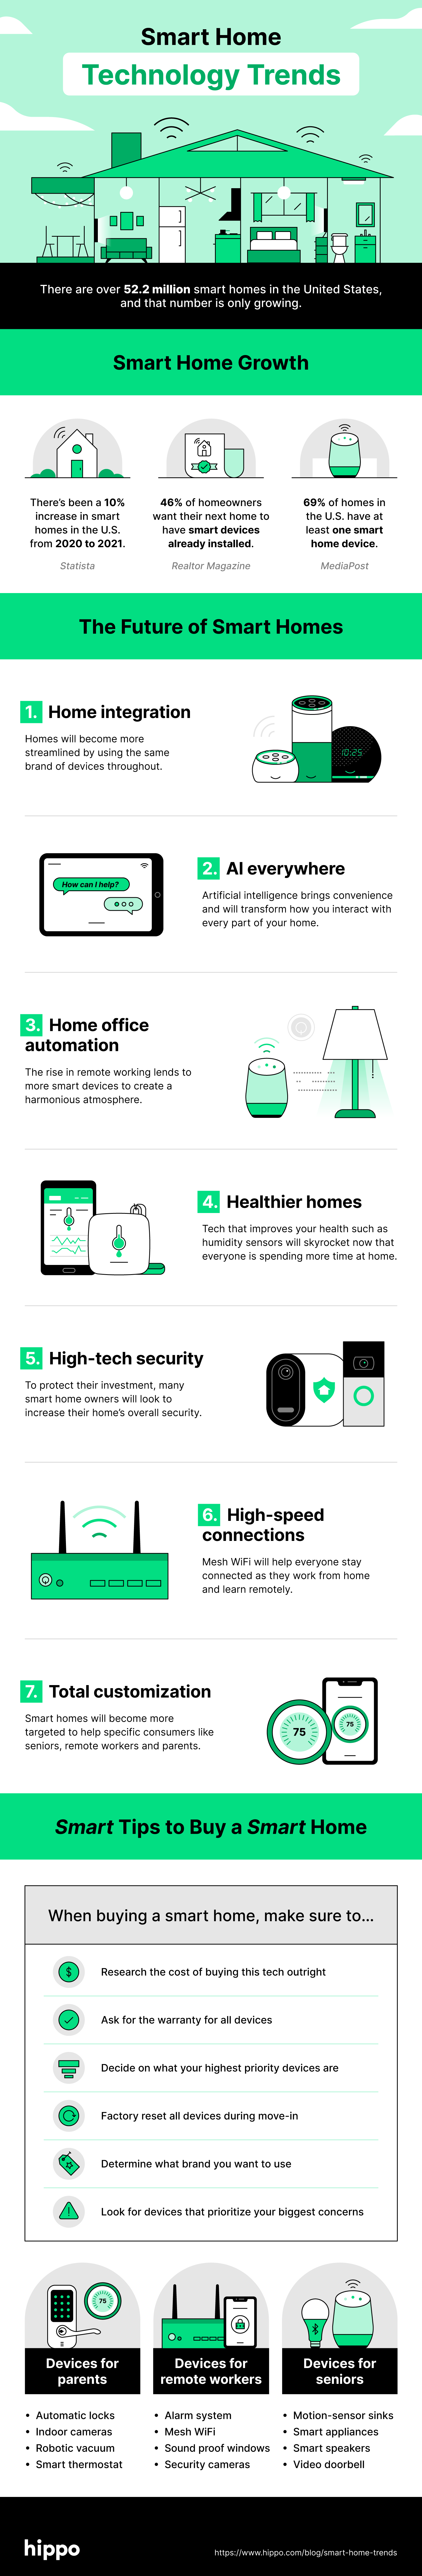 Green, Black, White and Grey infographic will illustrations of a home and various smart home devices